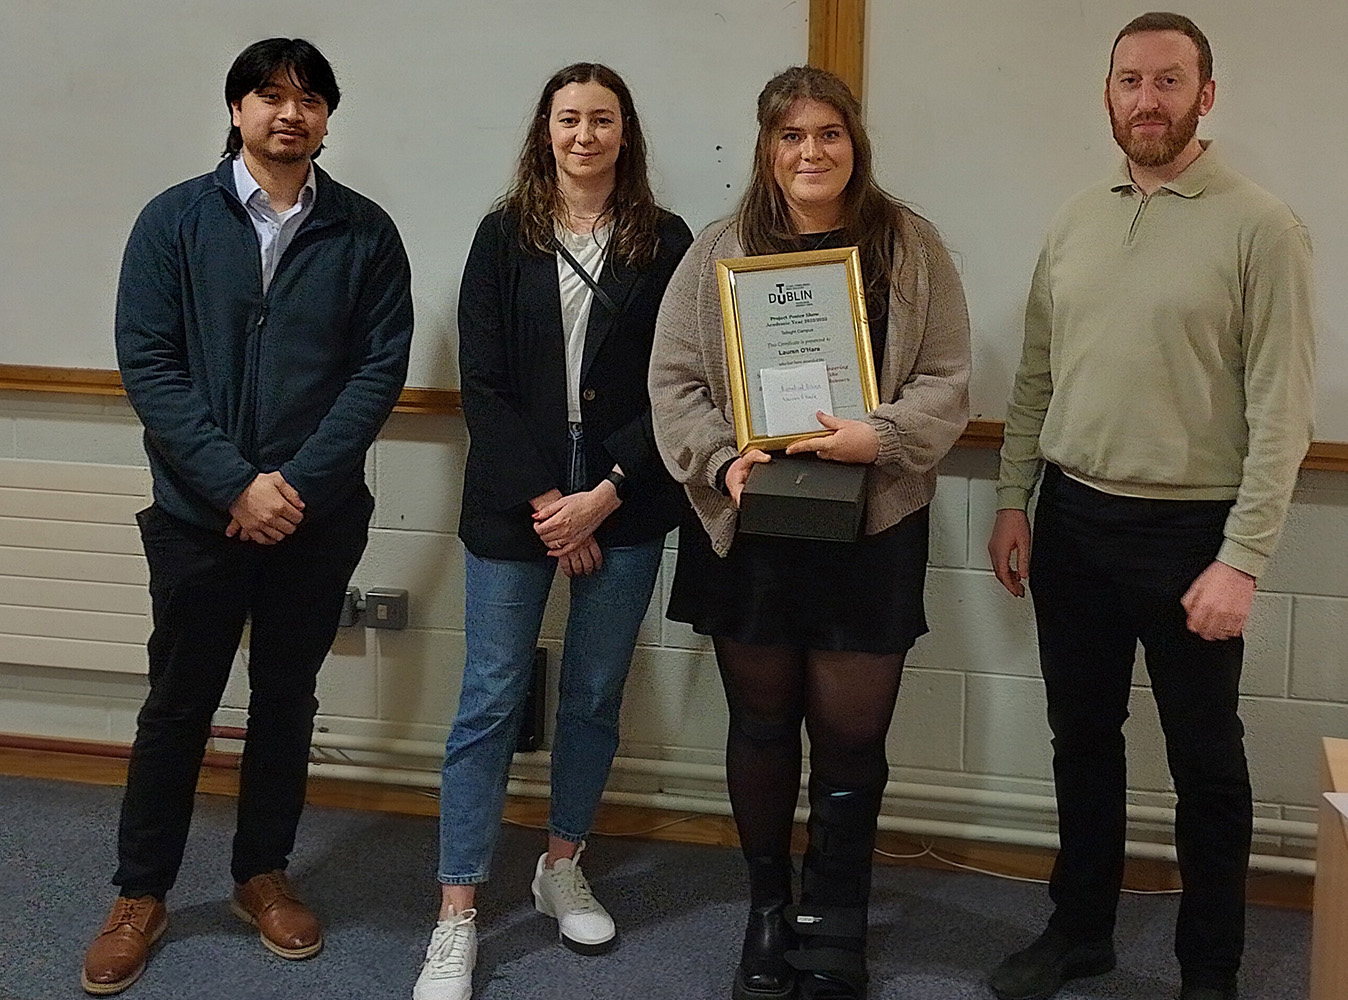 Students presented with awards from judges